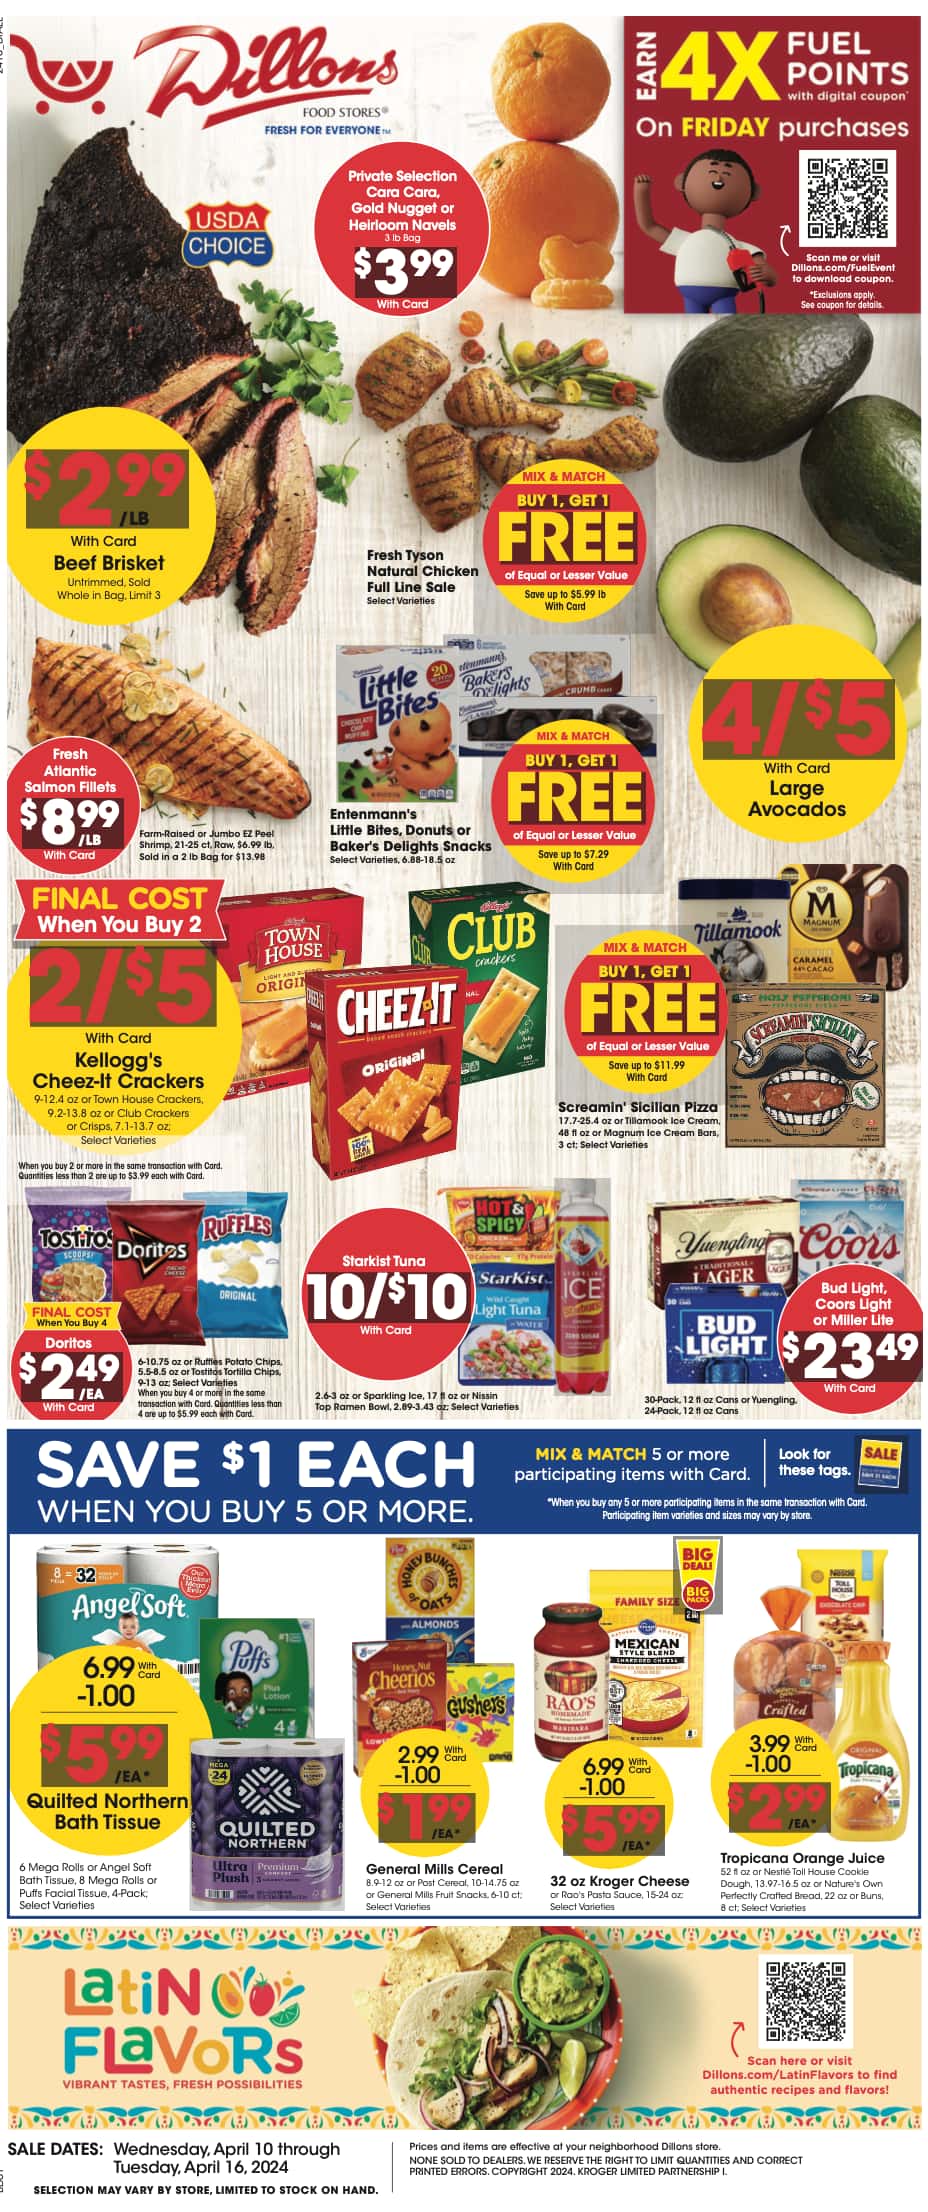 Dillons_weekly_ad_041024_01